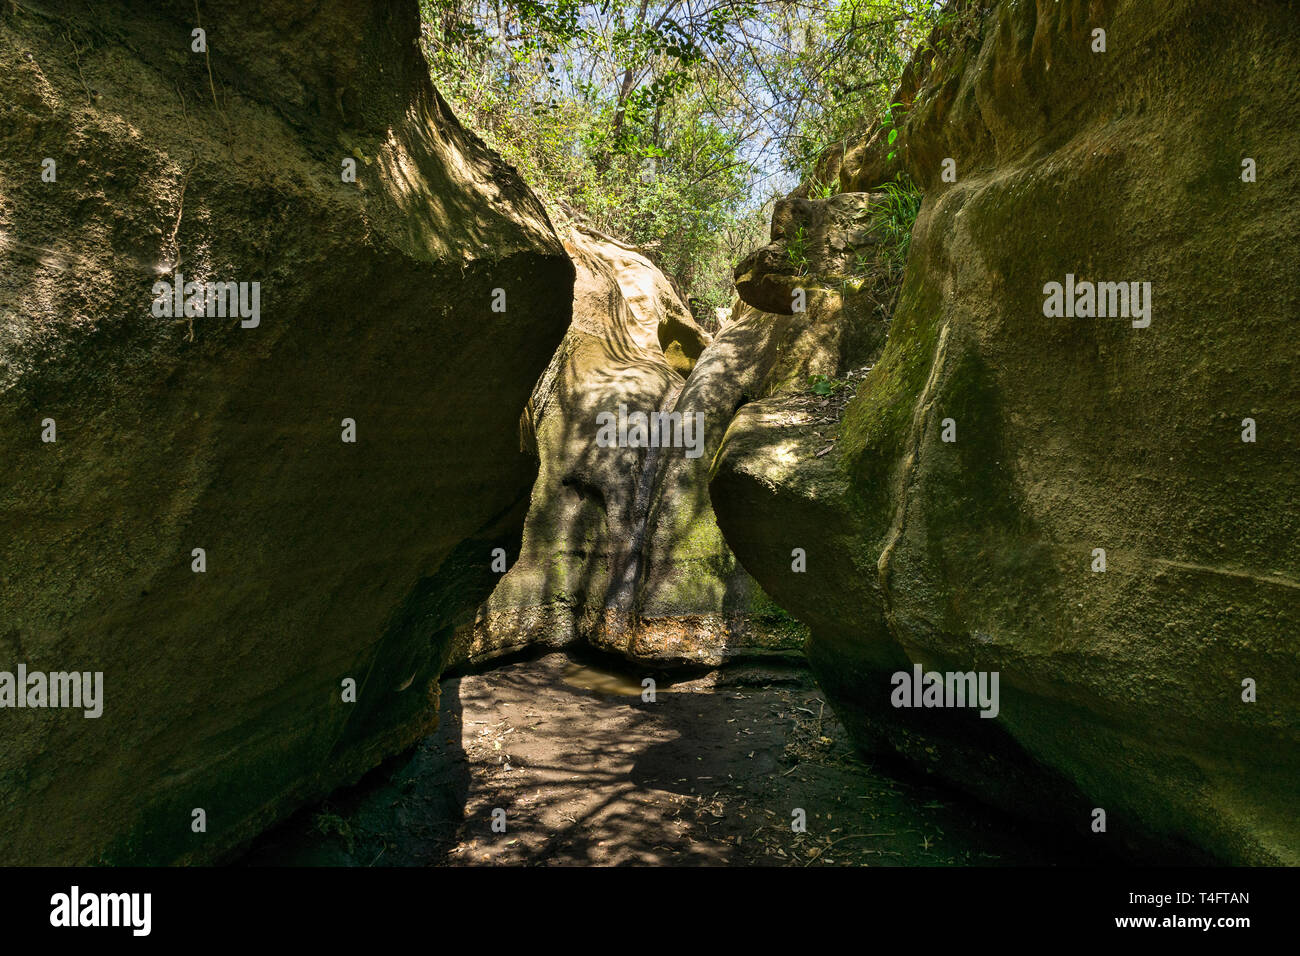 Dry river bed in the narrow section of Ol Njorowa gorge, Hells Gate National Park, Kenya Stock Photo